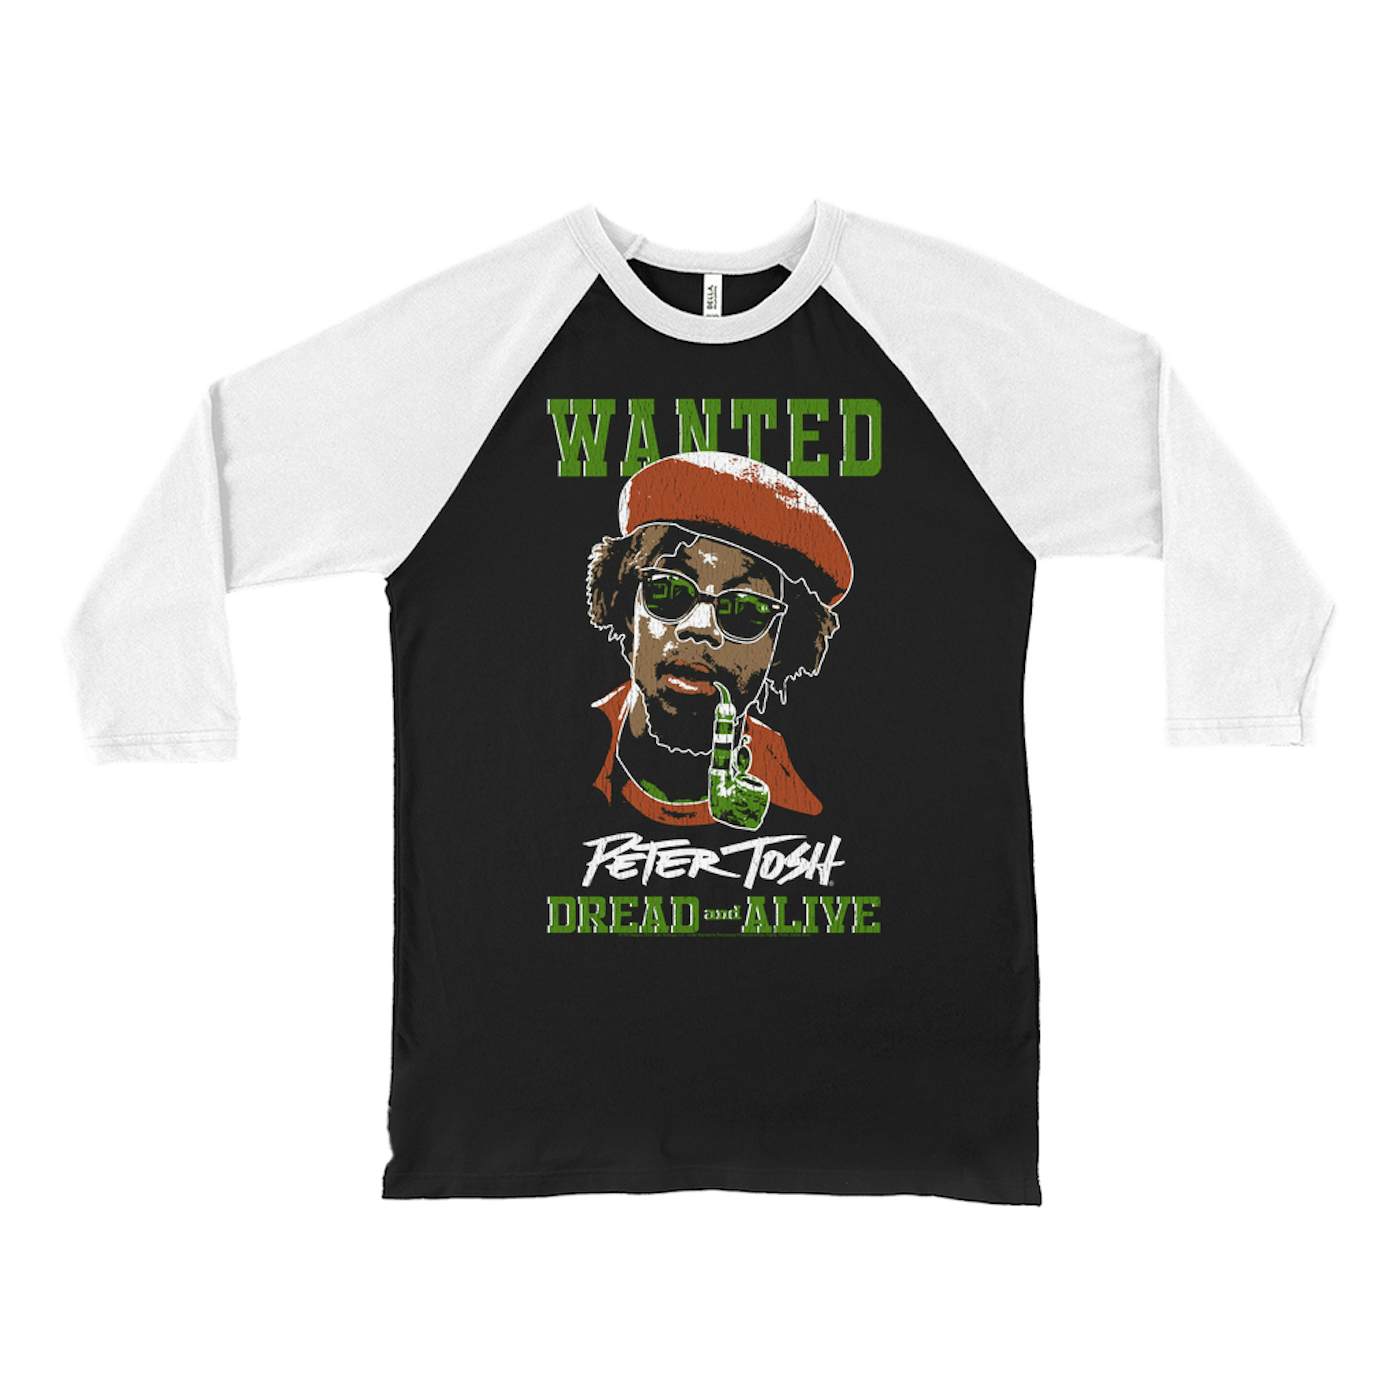 Peter Tosh 3/4 Sleeve Baseball Tee | Wanted Dread And Live (Merchbar Exclusive) Peter Tosh Shirt